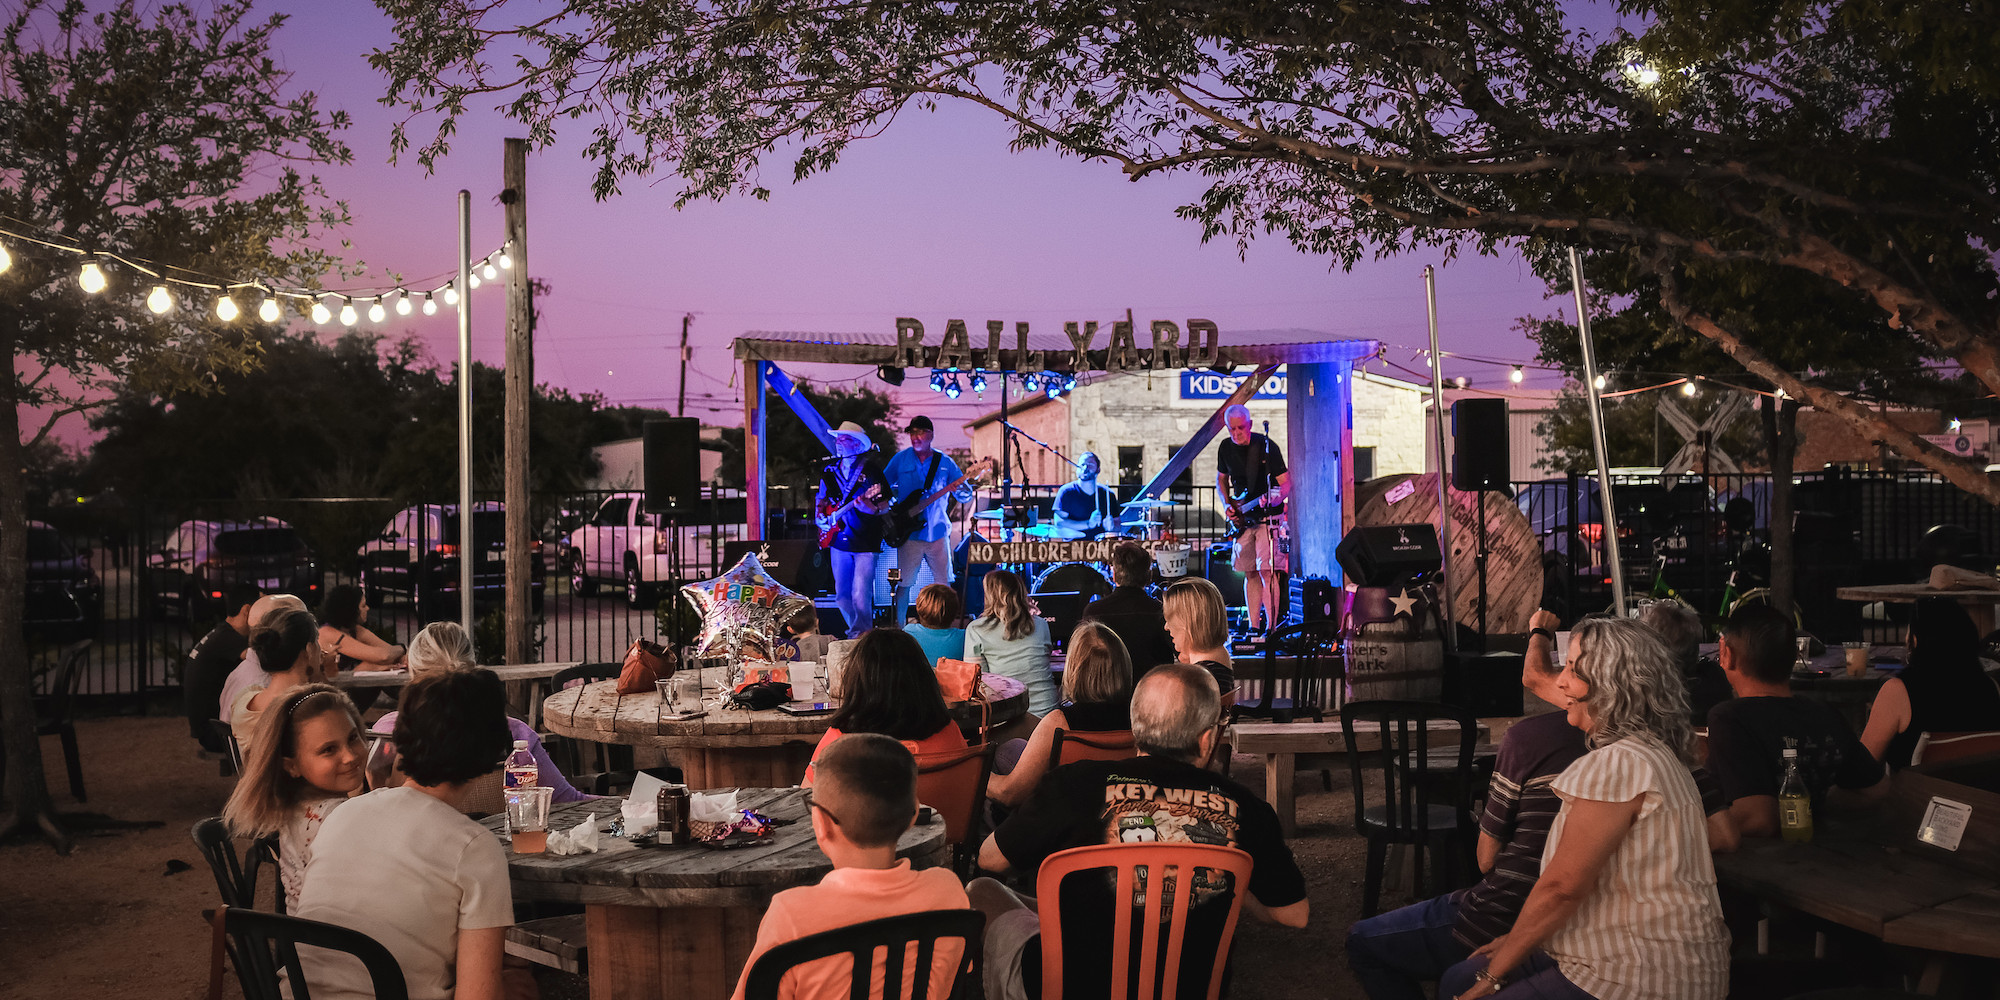 A crowd sitting at tables enjoys outdoor live music at the Frisco Rail Yard.